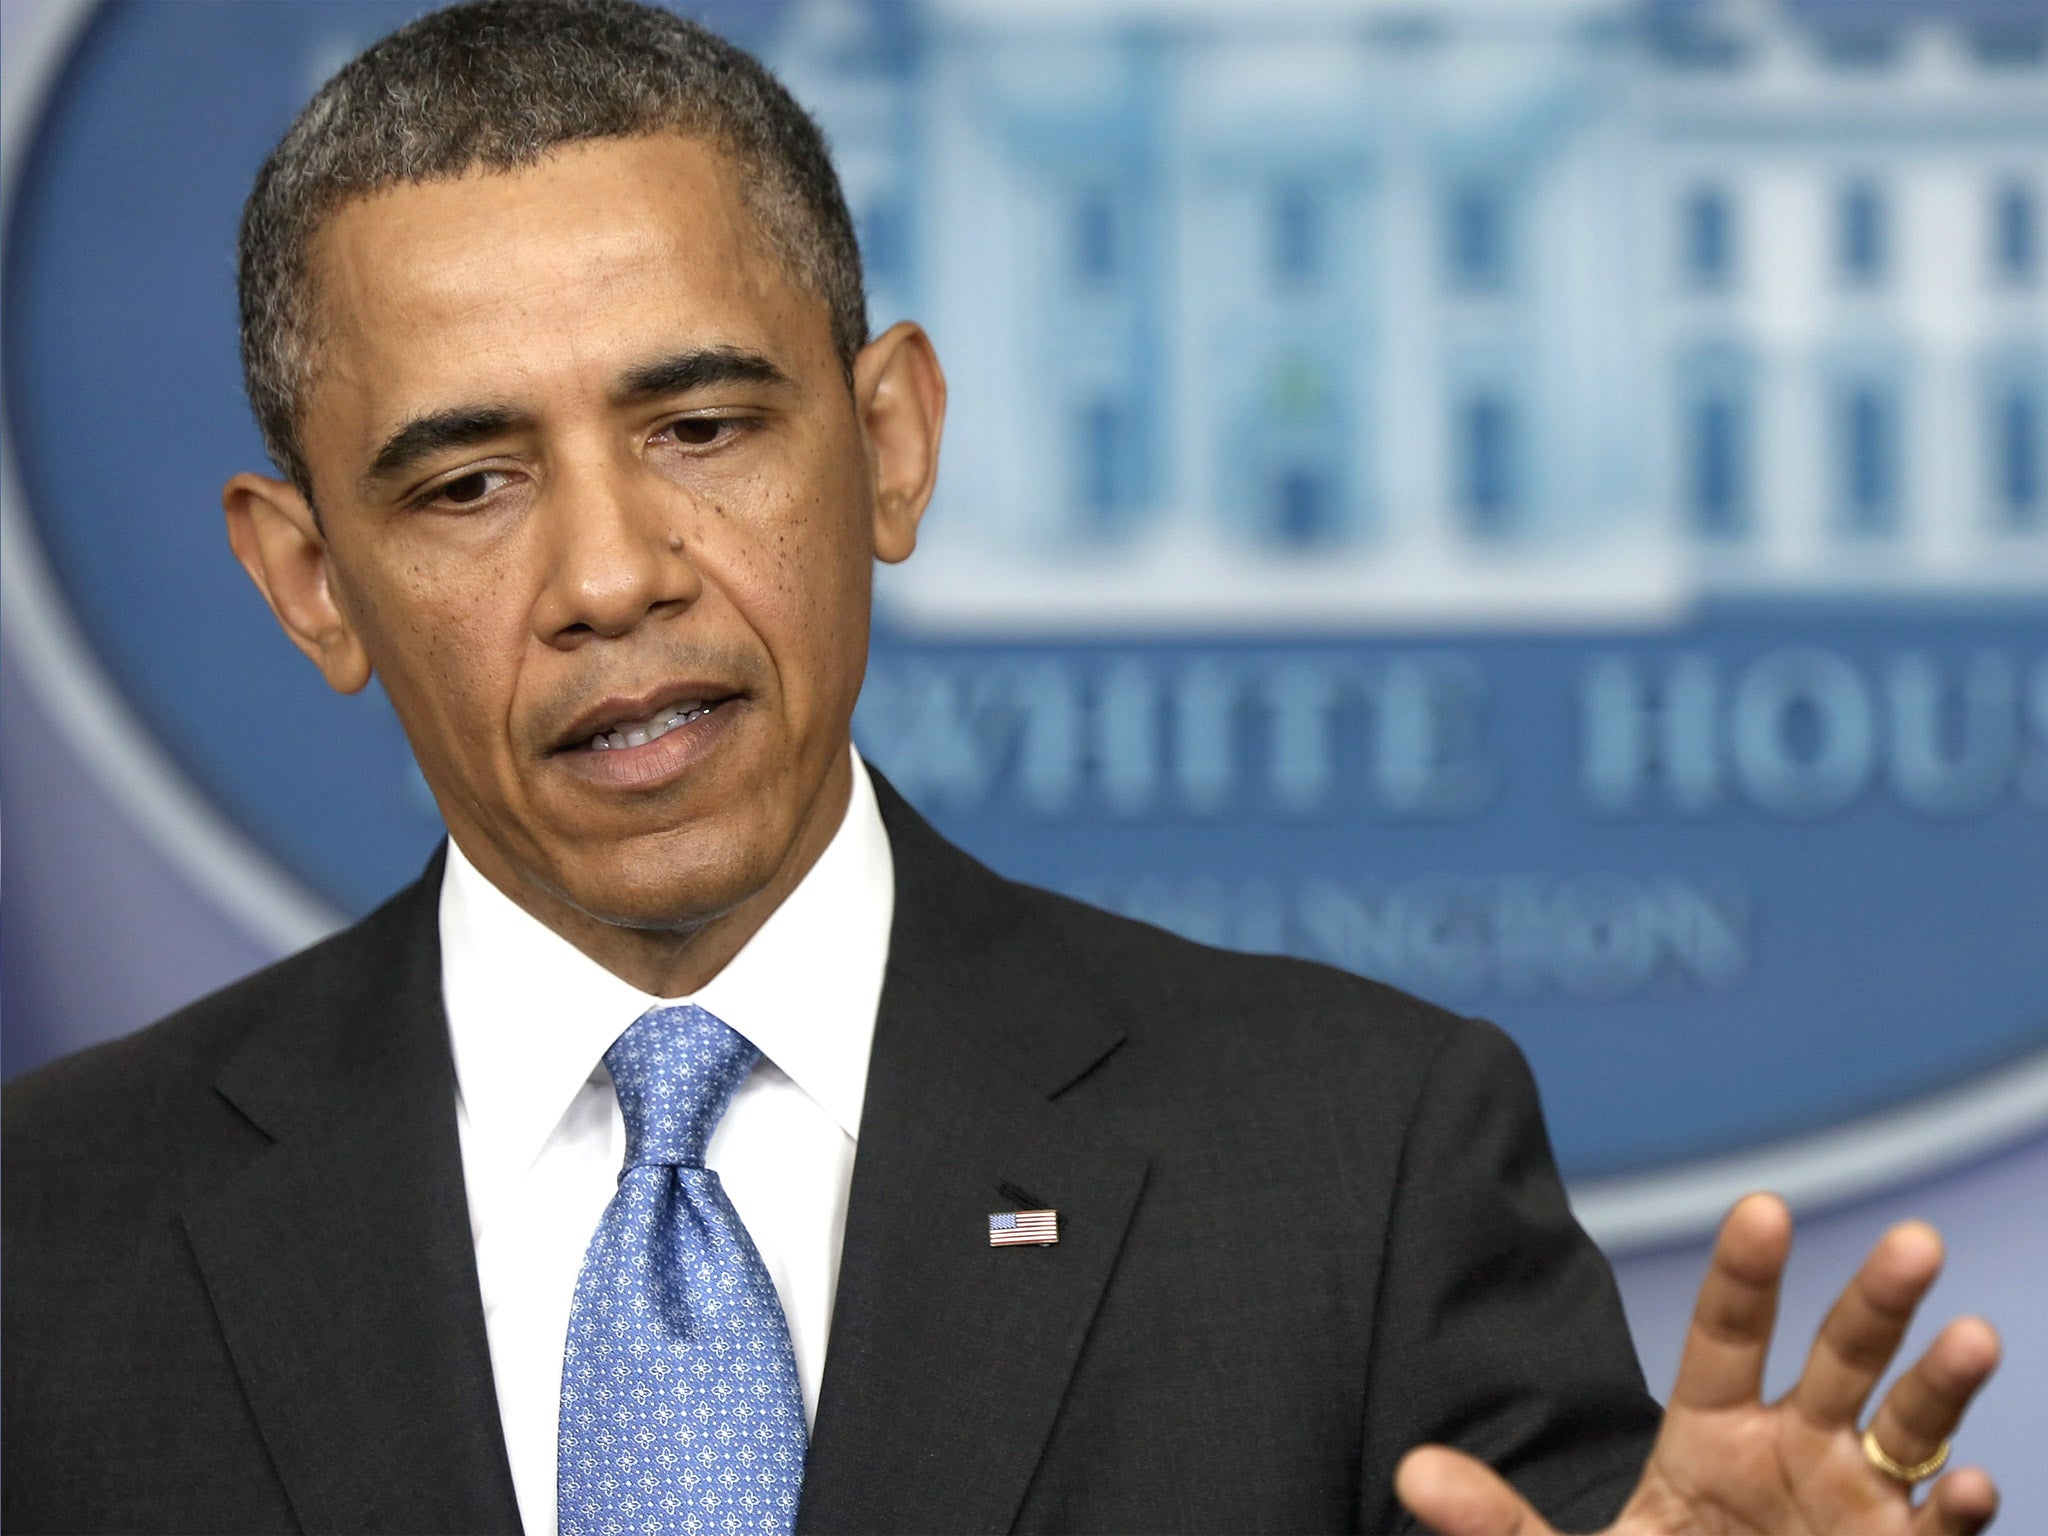 Obama has been damaged by the IRS’s ‘outrageous’ pursuit of right-wing groups